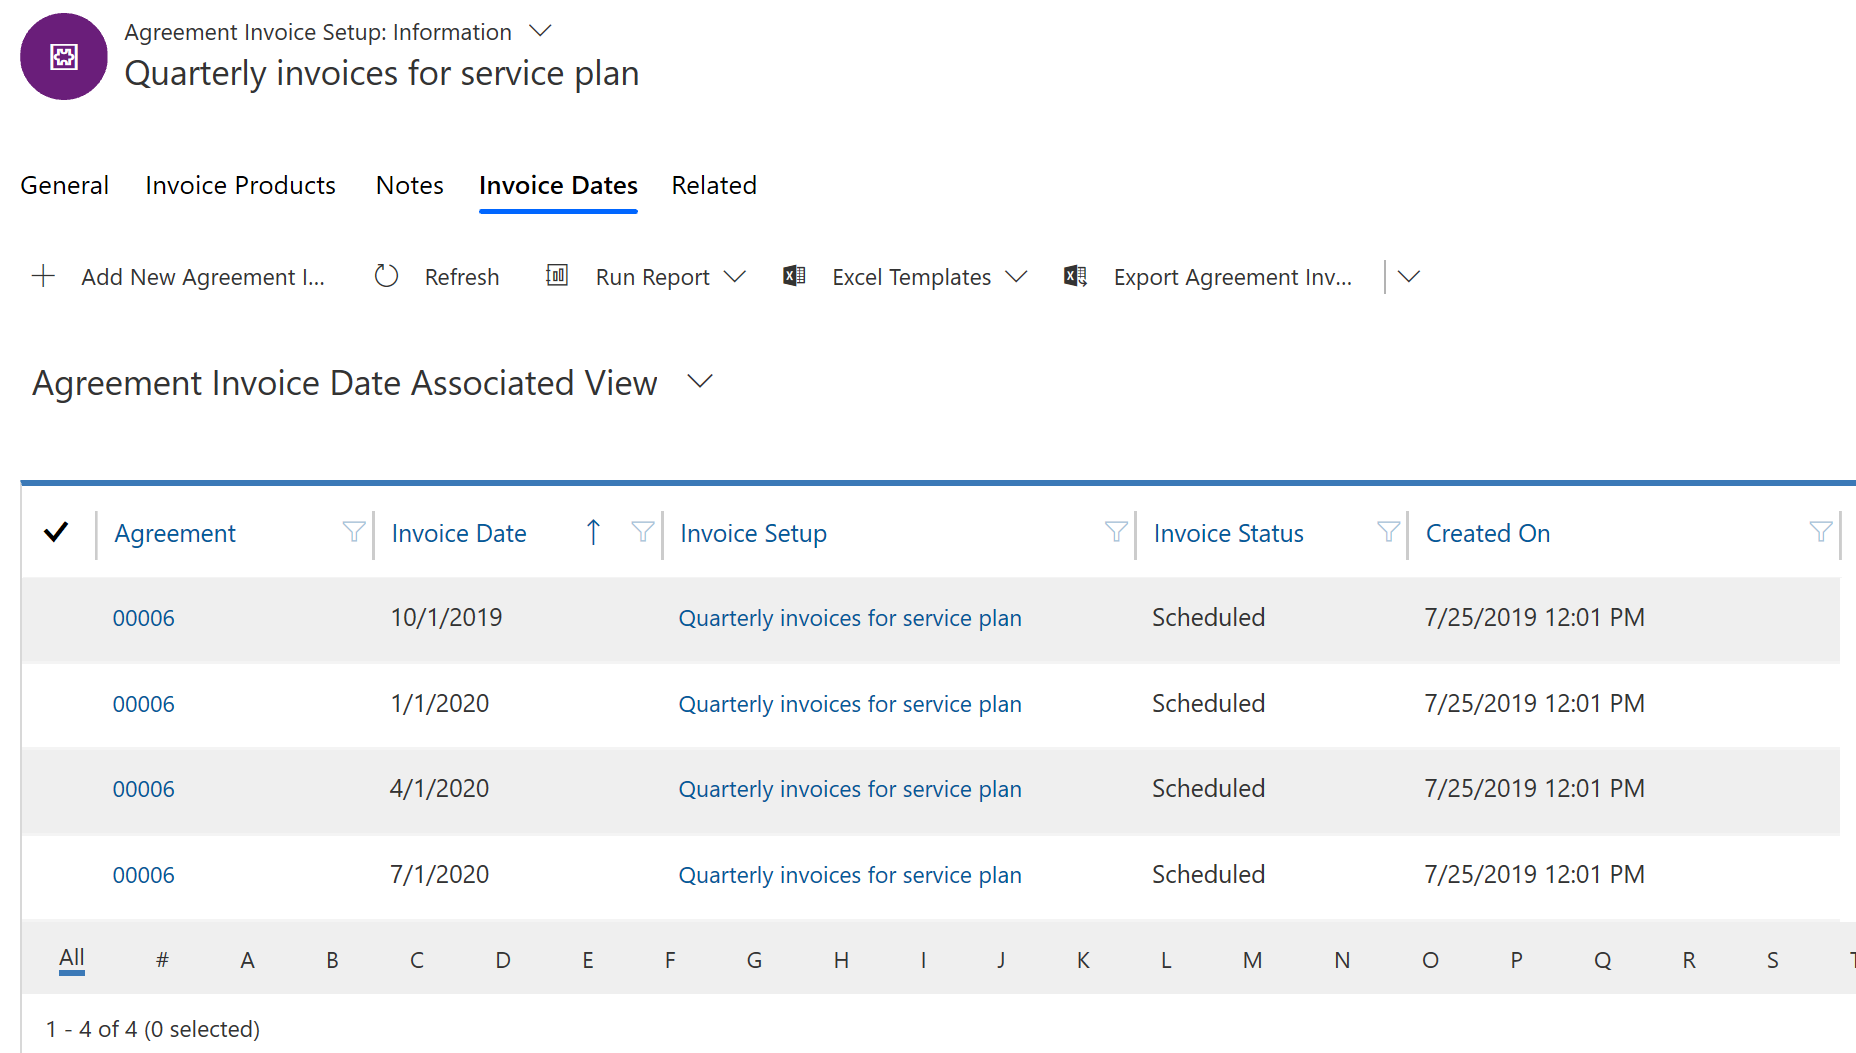 Screenshot of the agreement invoice setup, showing a list of invoice dates.